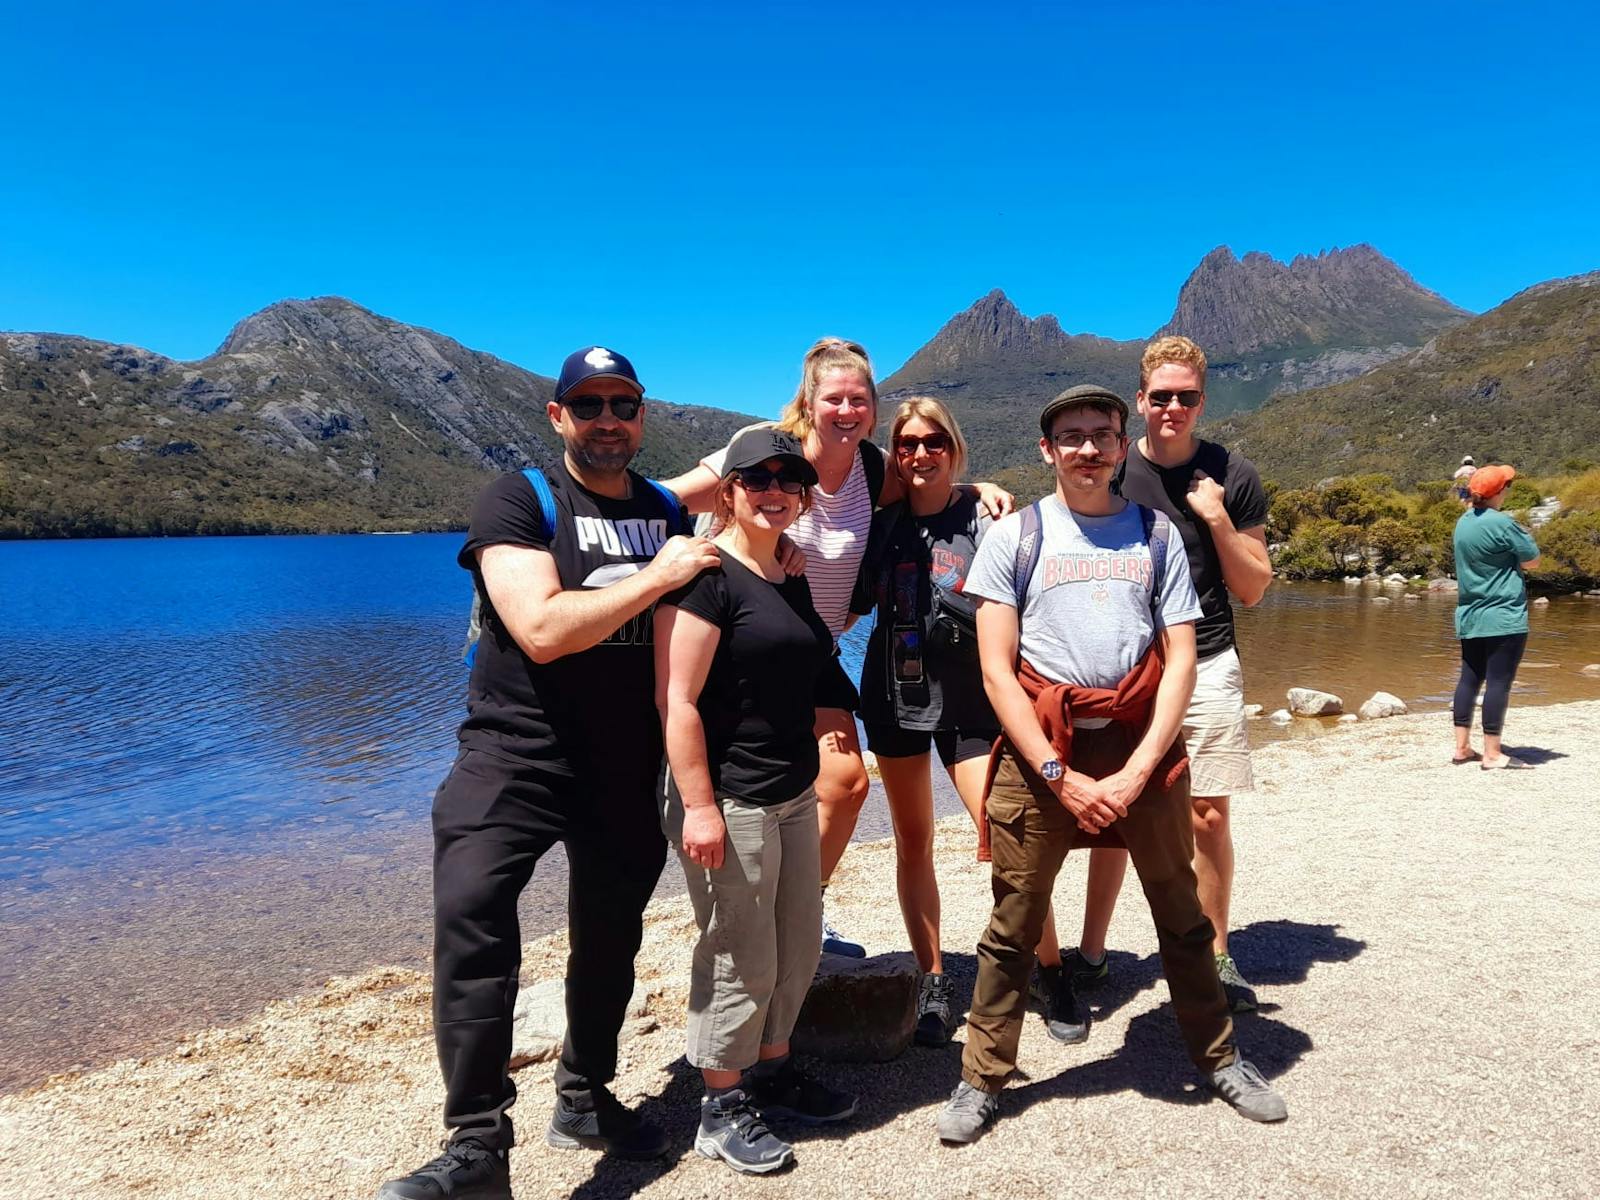 Cradle Mountain and Dove Lake on a gorgeous Summers day